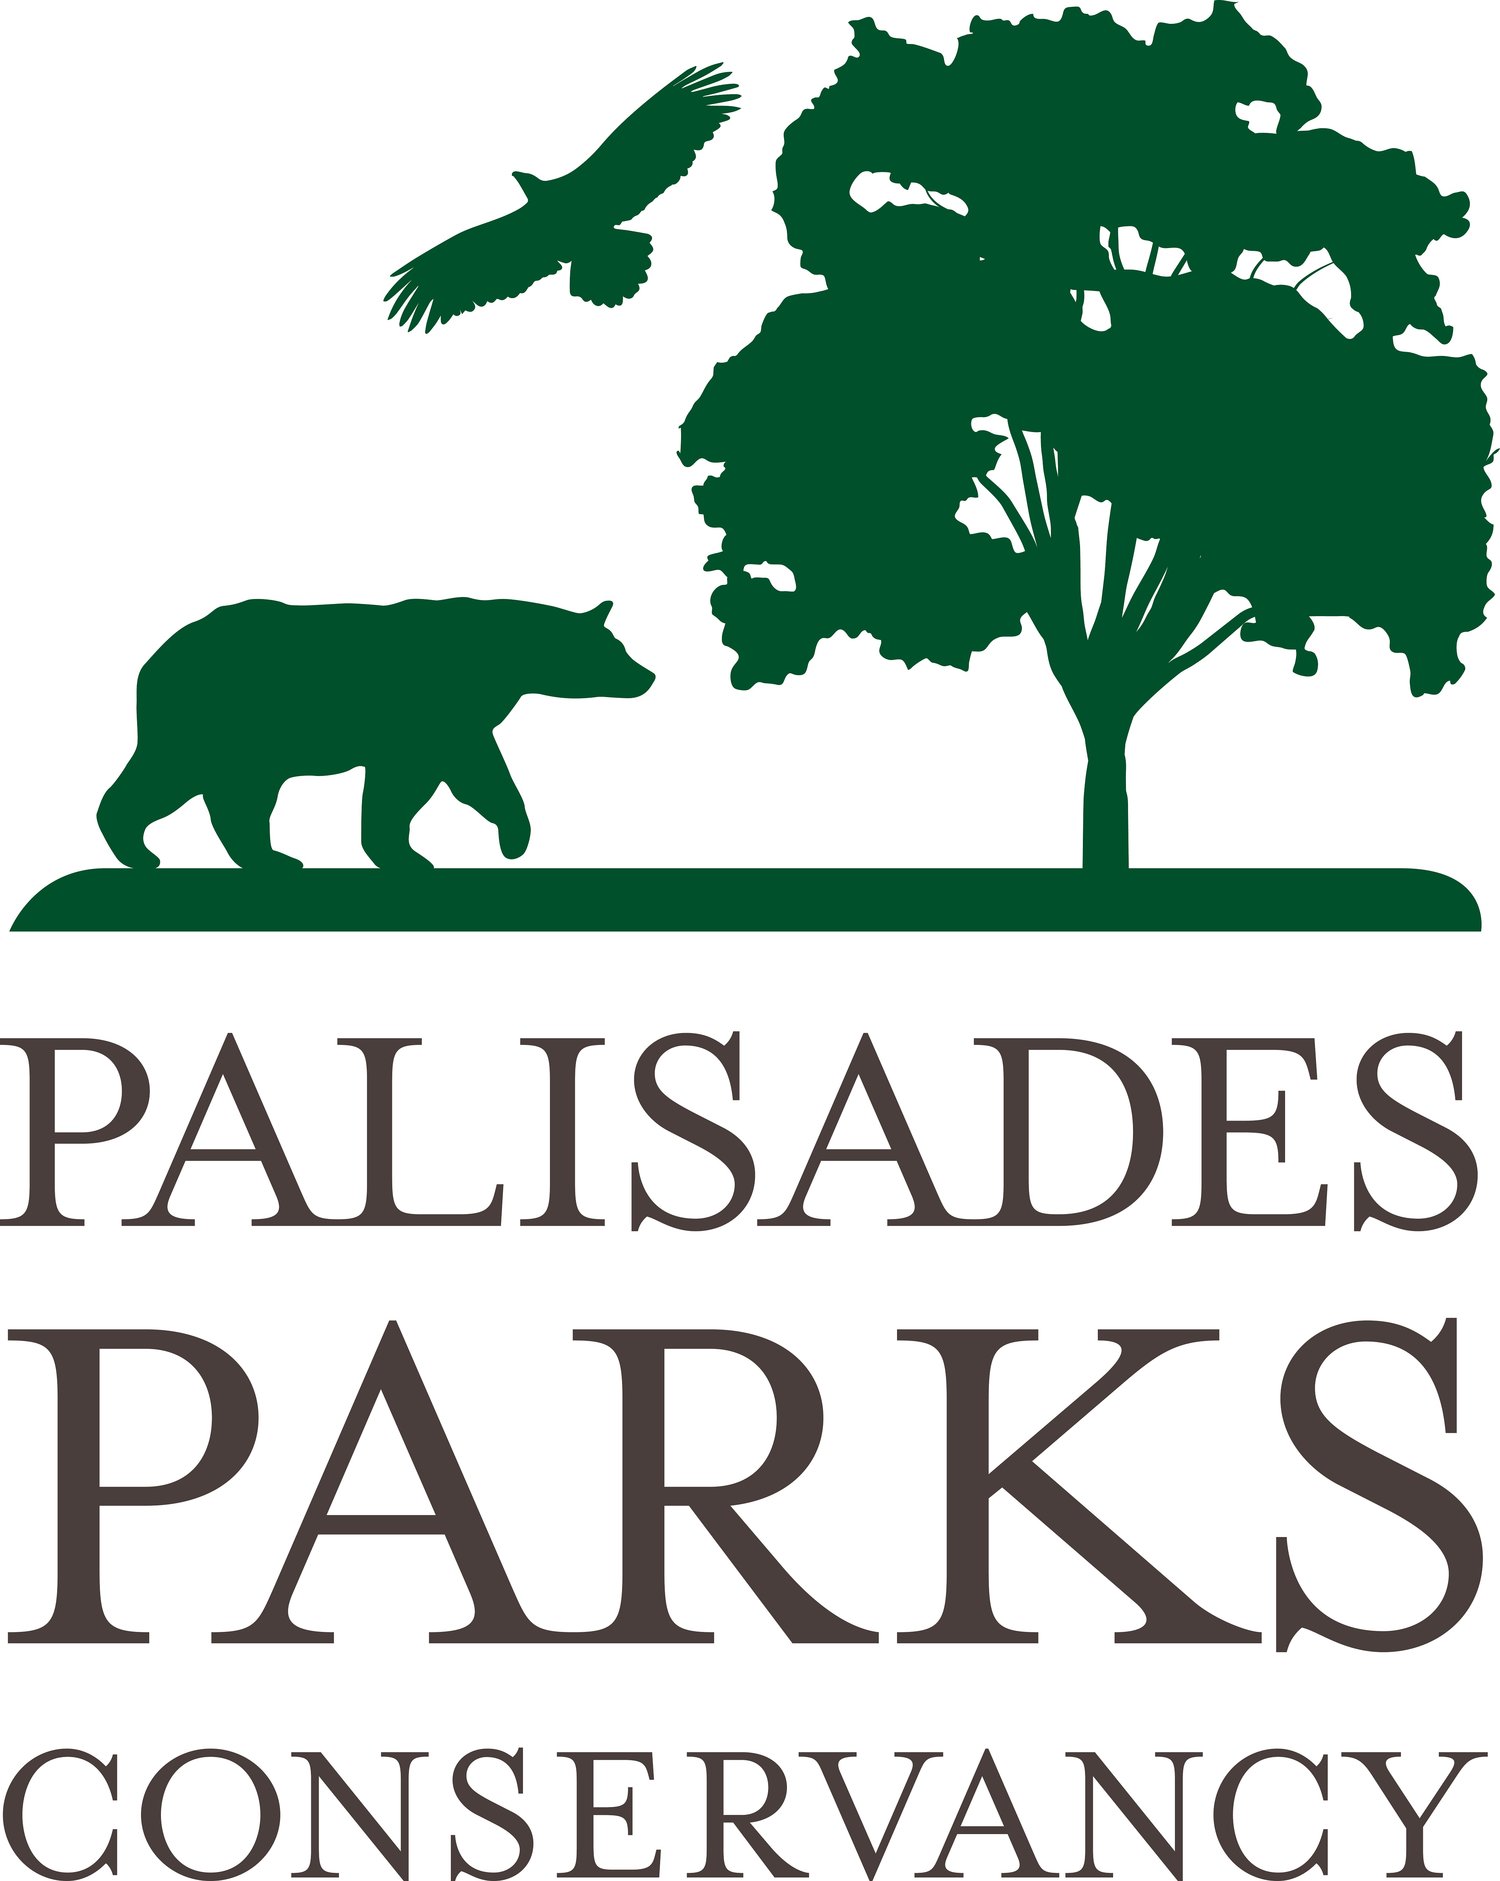 Palisades Parks Conservancy